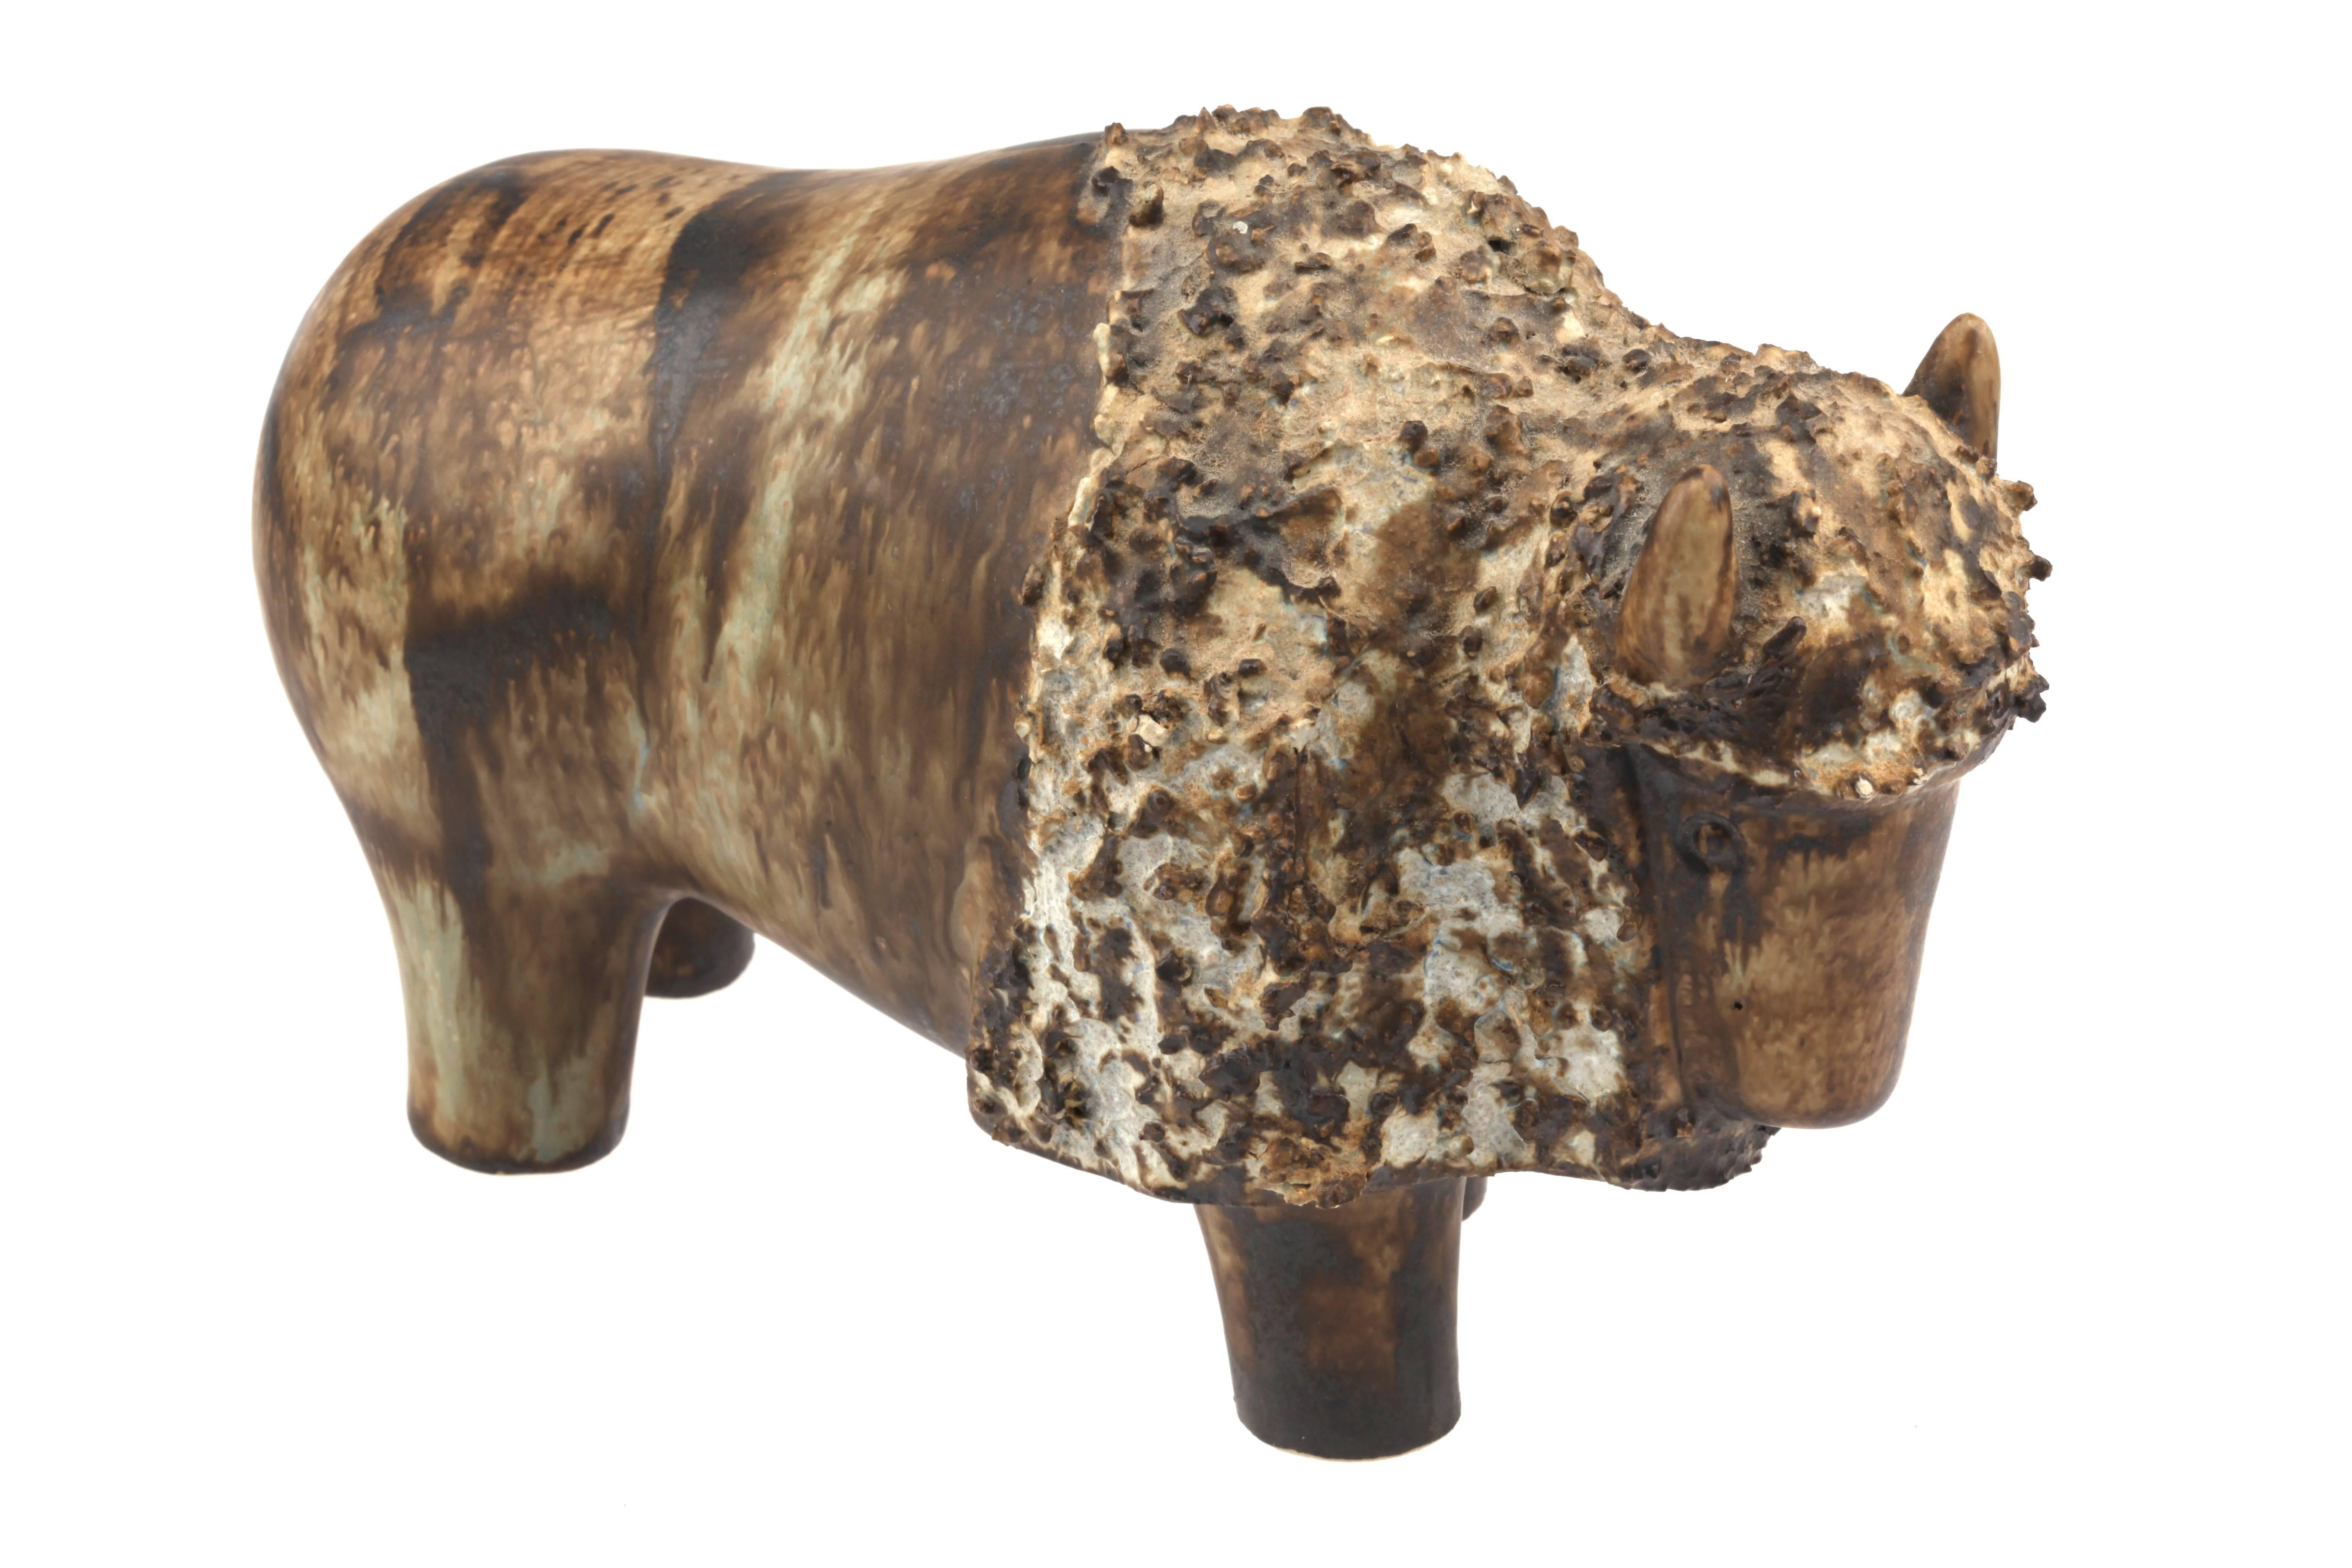 Vintage Mid-Century Ego Stengods Lidkōping Swedish ceramic bison, Bisonoxe. Designed by Heinz Schlichting. Made in Sweden.
Ego Stengods was a ceramic factory founded by Willy Fischer and Gösta Olofsson in 1966. Willy Fischer worked previously for